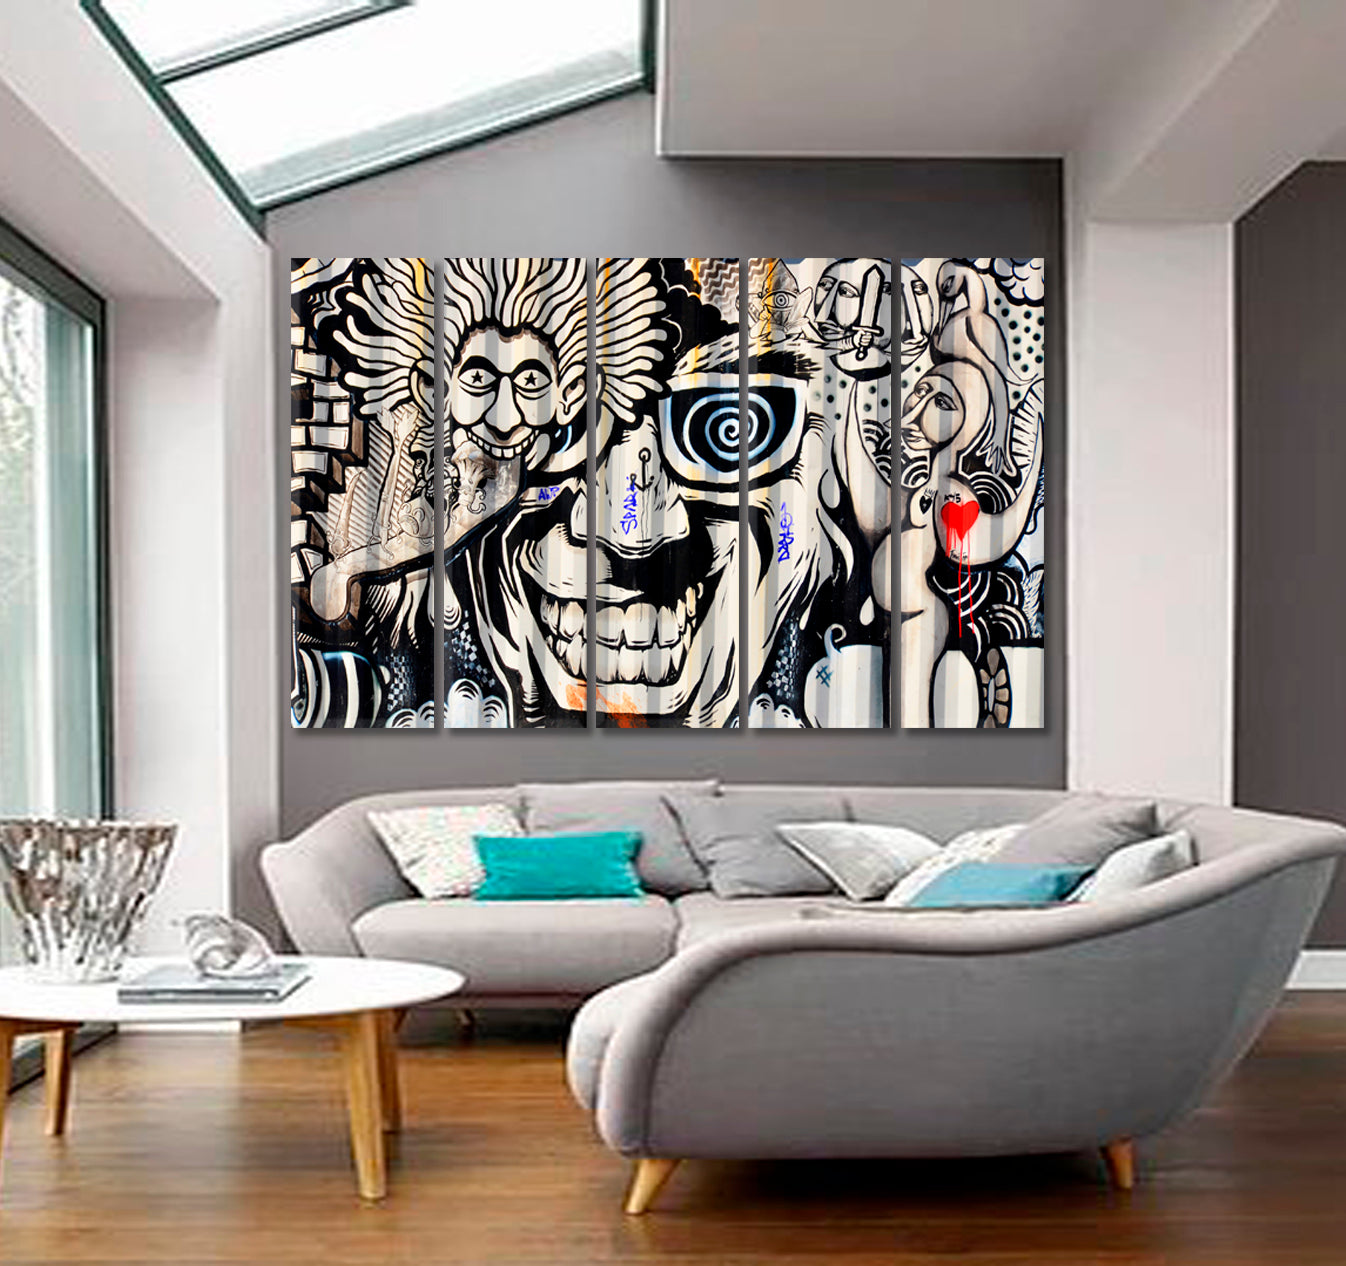 Abstract Expressionism Surrealism Graffiti on the Wall Street Art Abstract Art Print Artesty 5 panels 36" x 24" 